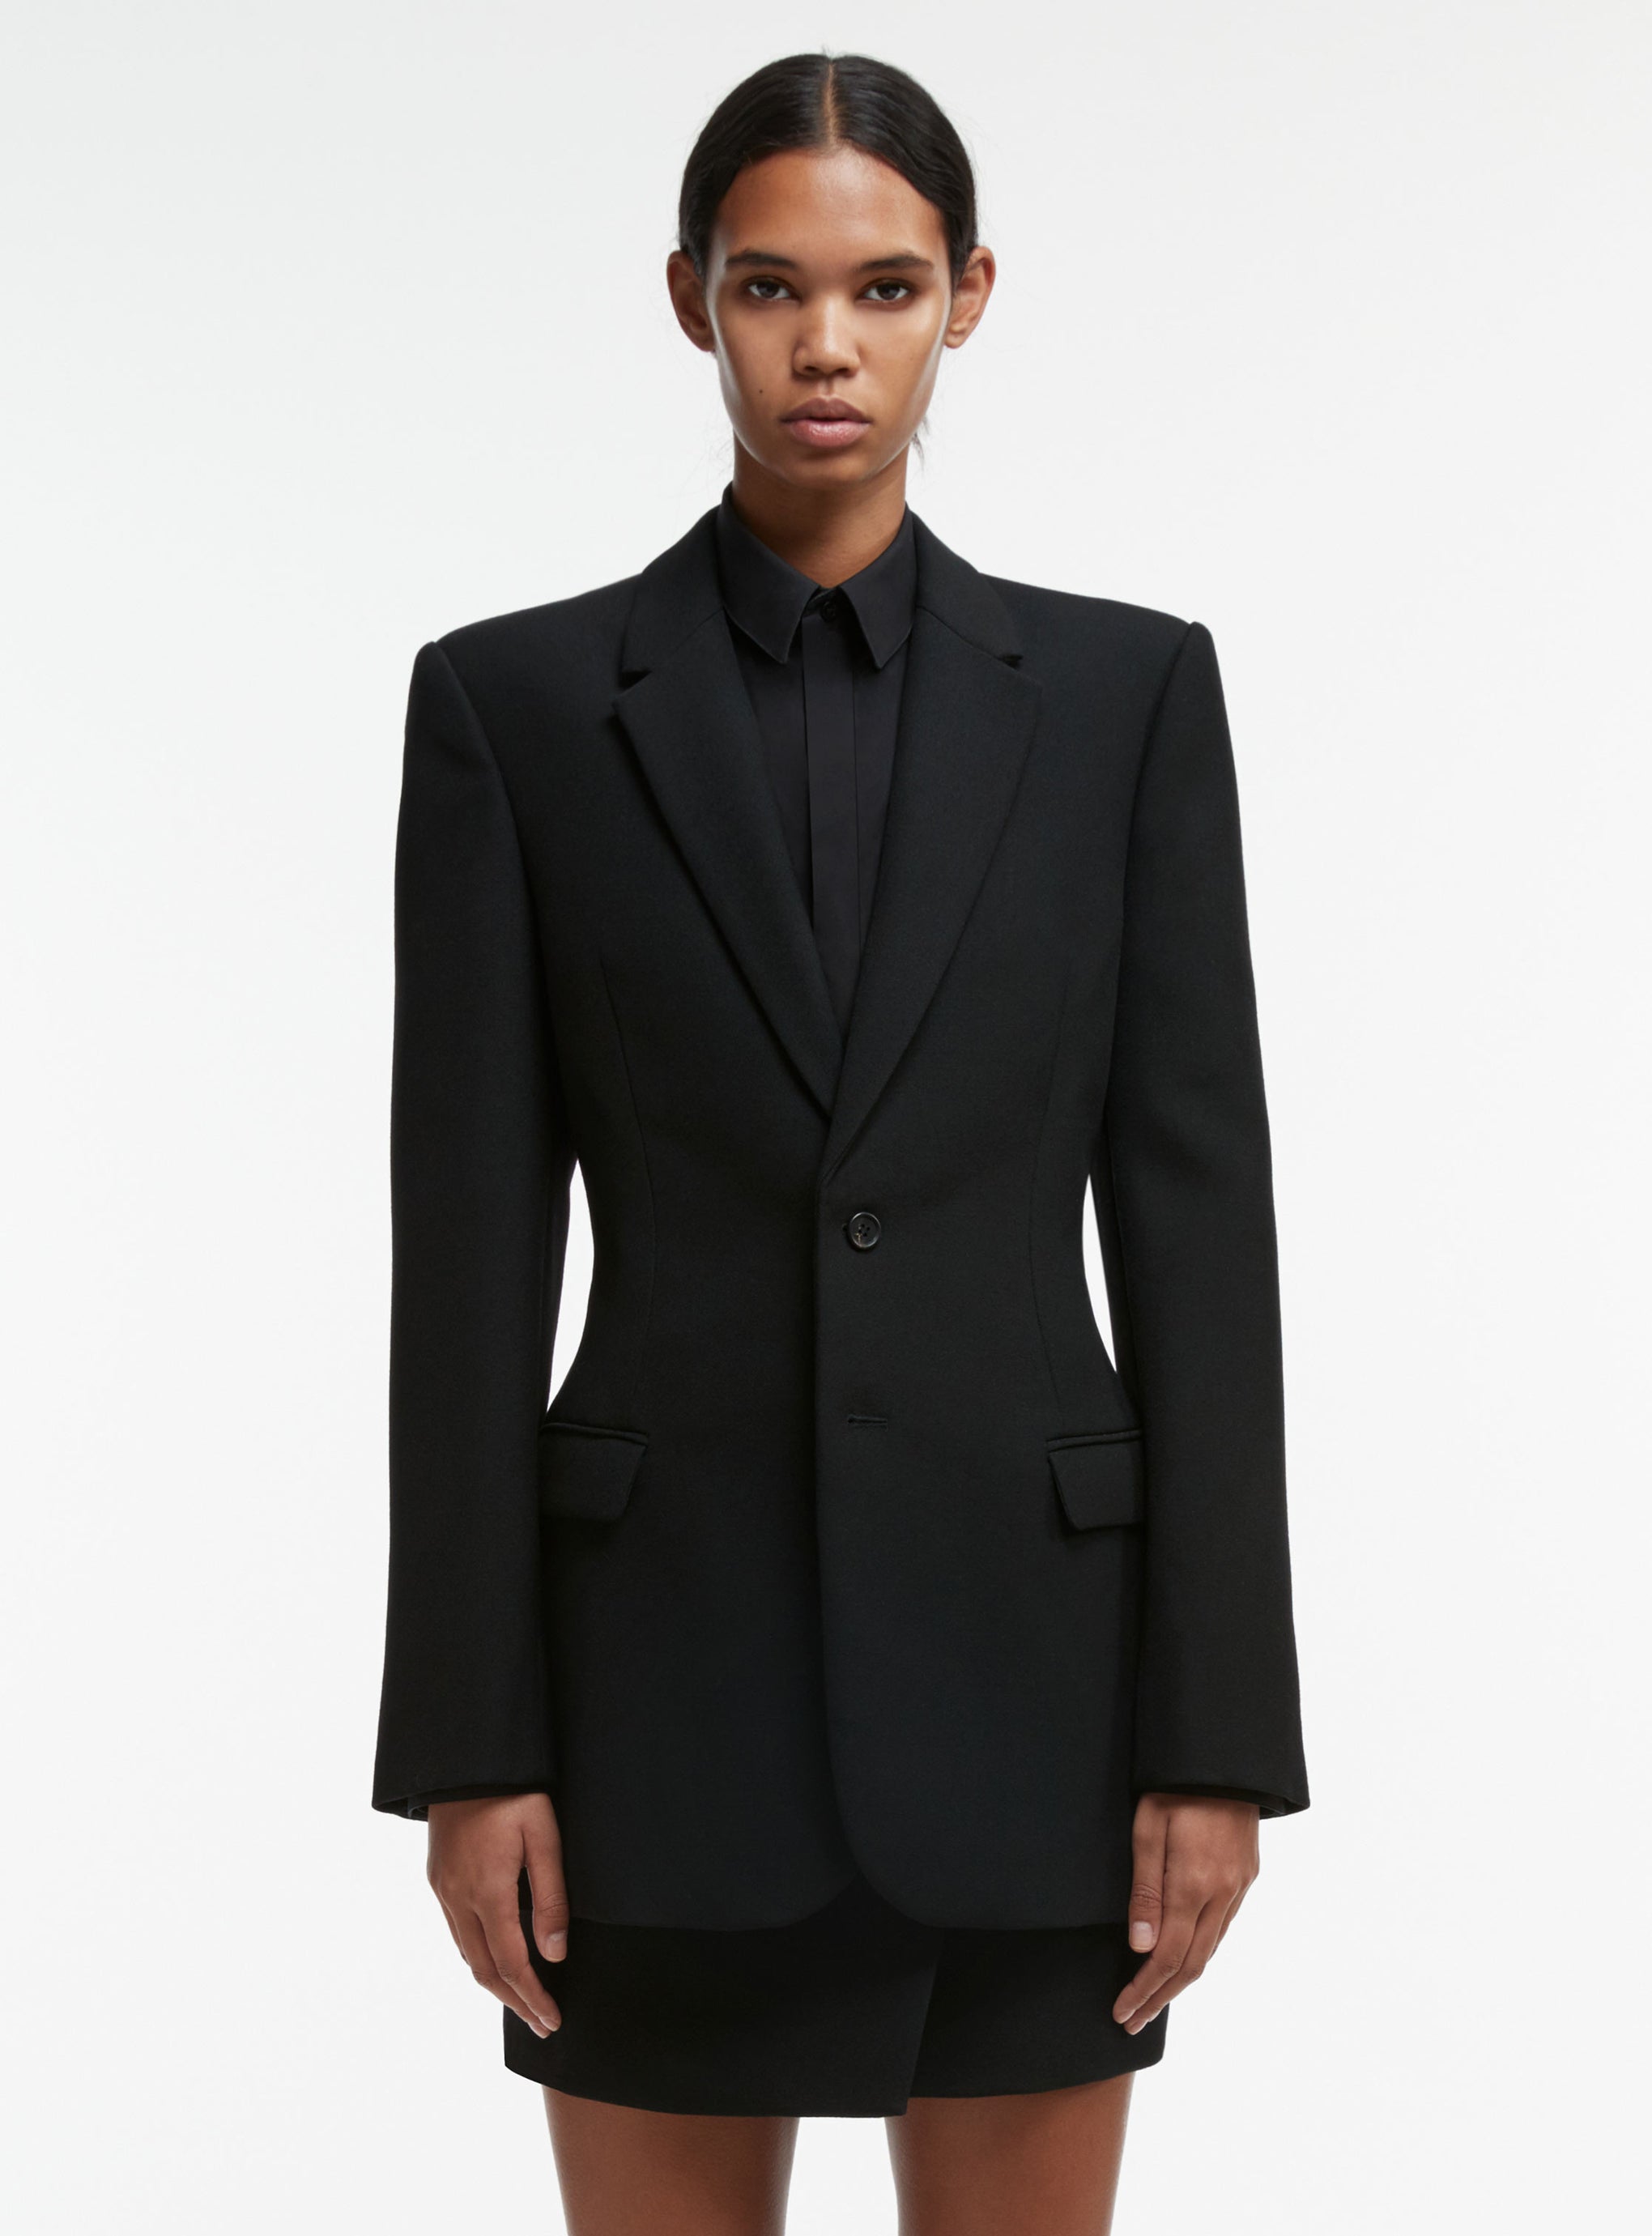 The Wardrobe NYC Contour Blazer in Black available at The New Trend Australia